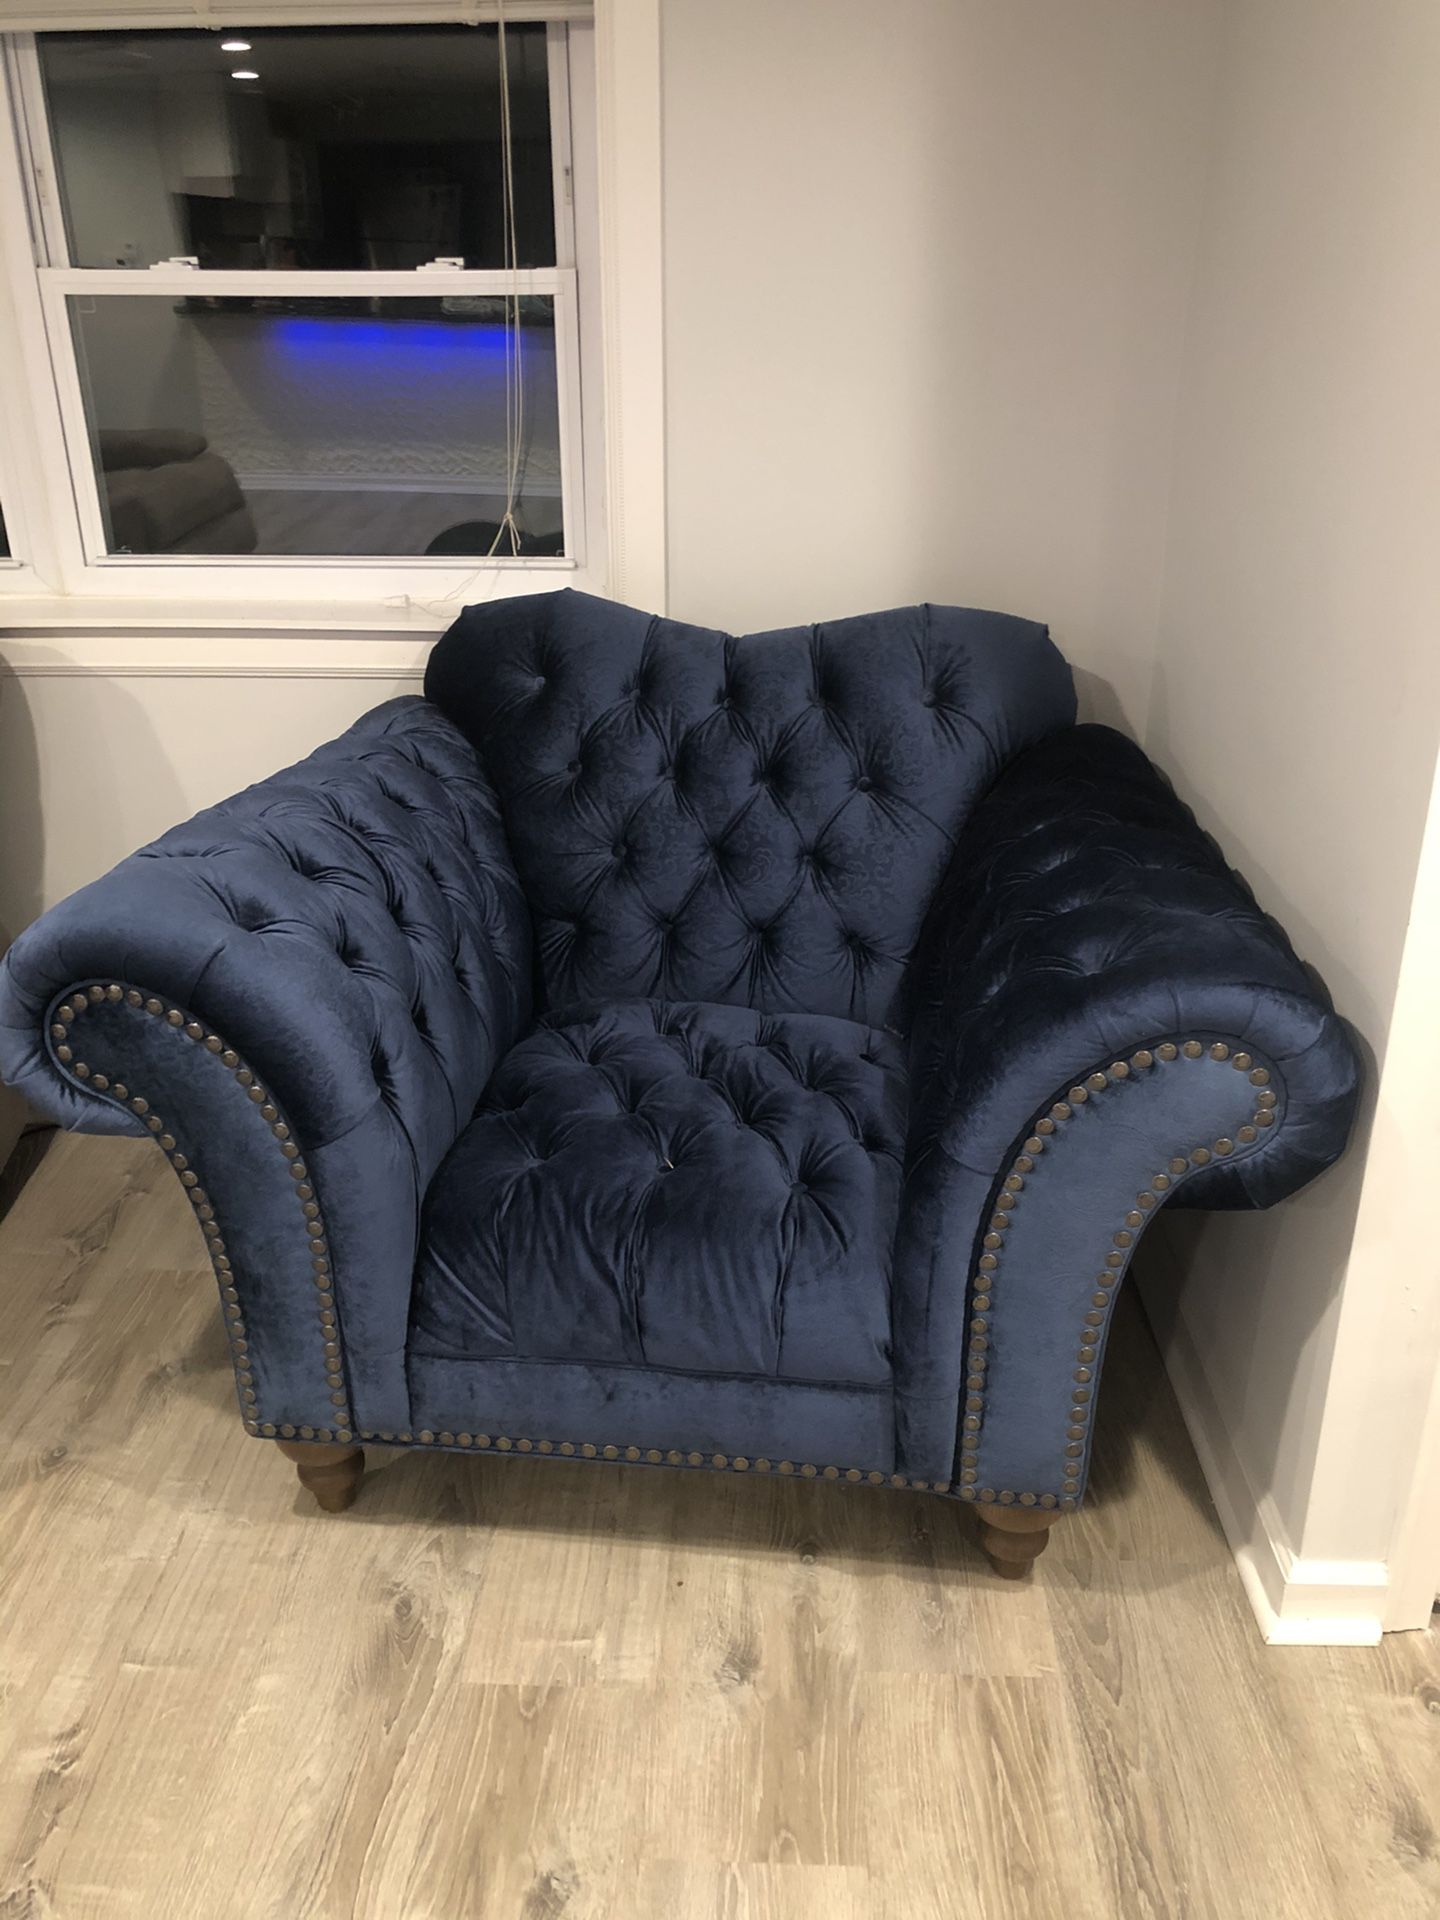 Blue couch , new never used, blue chair